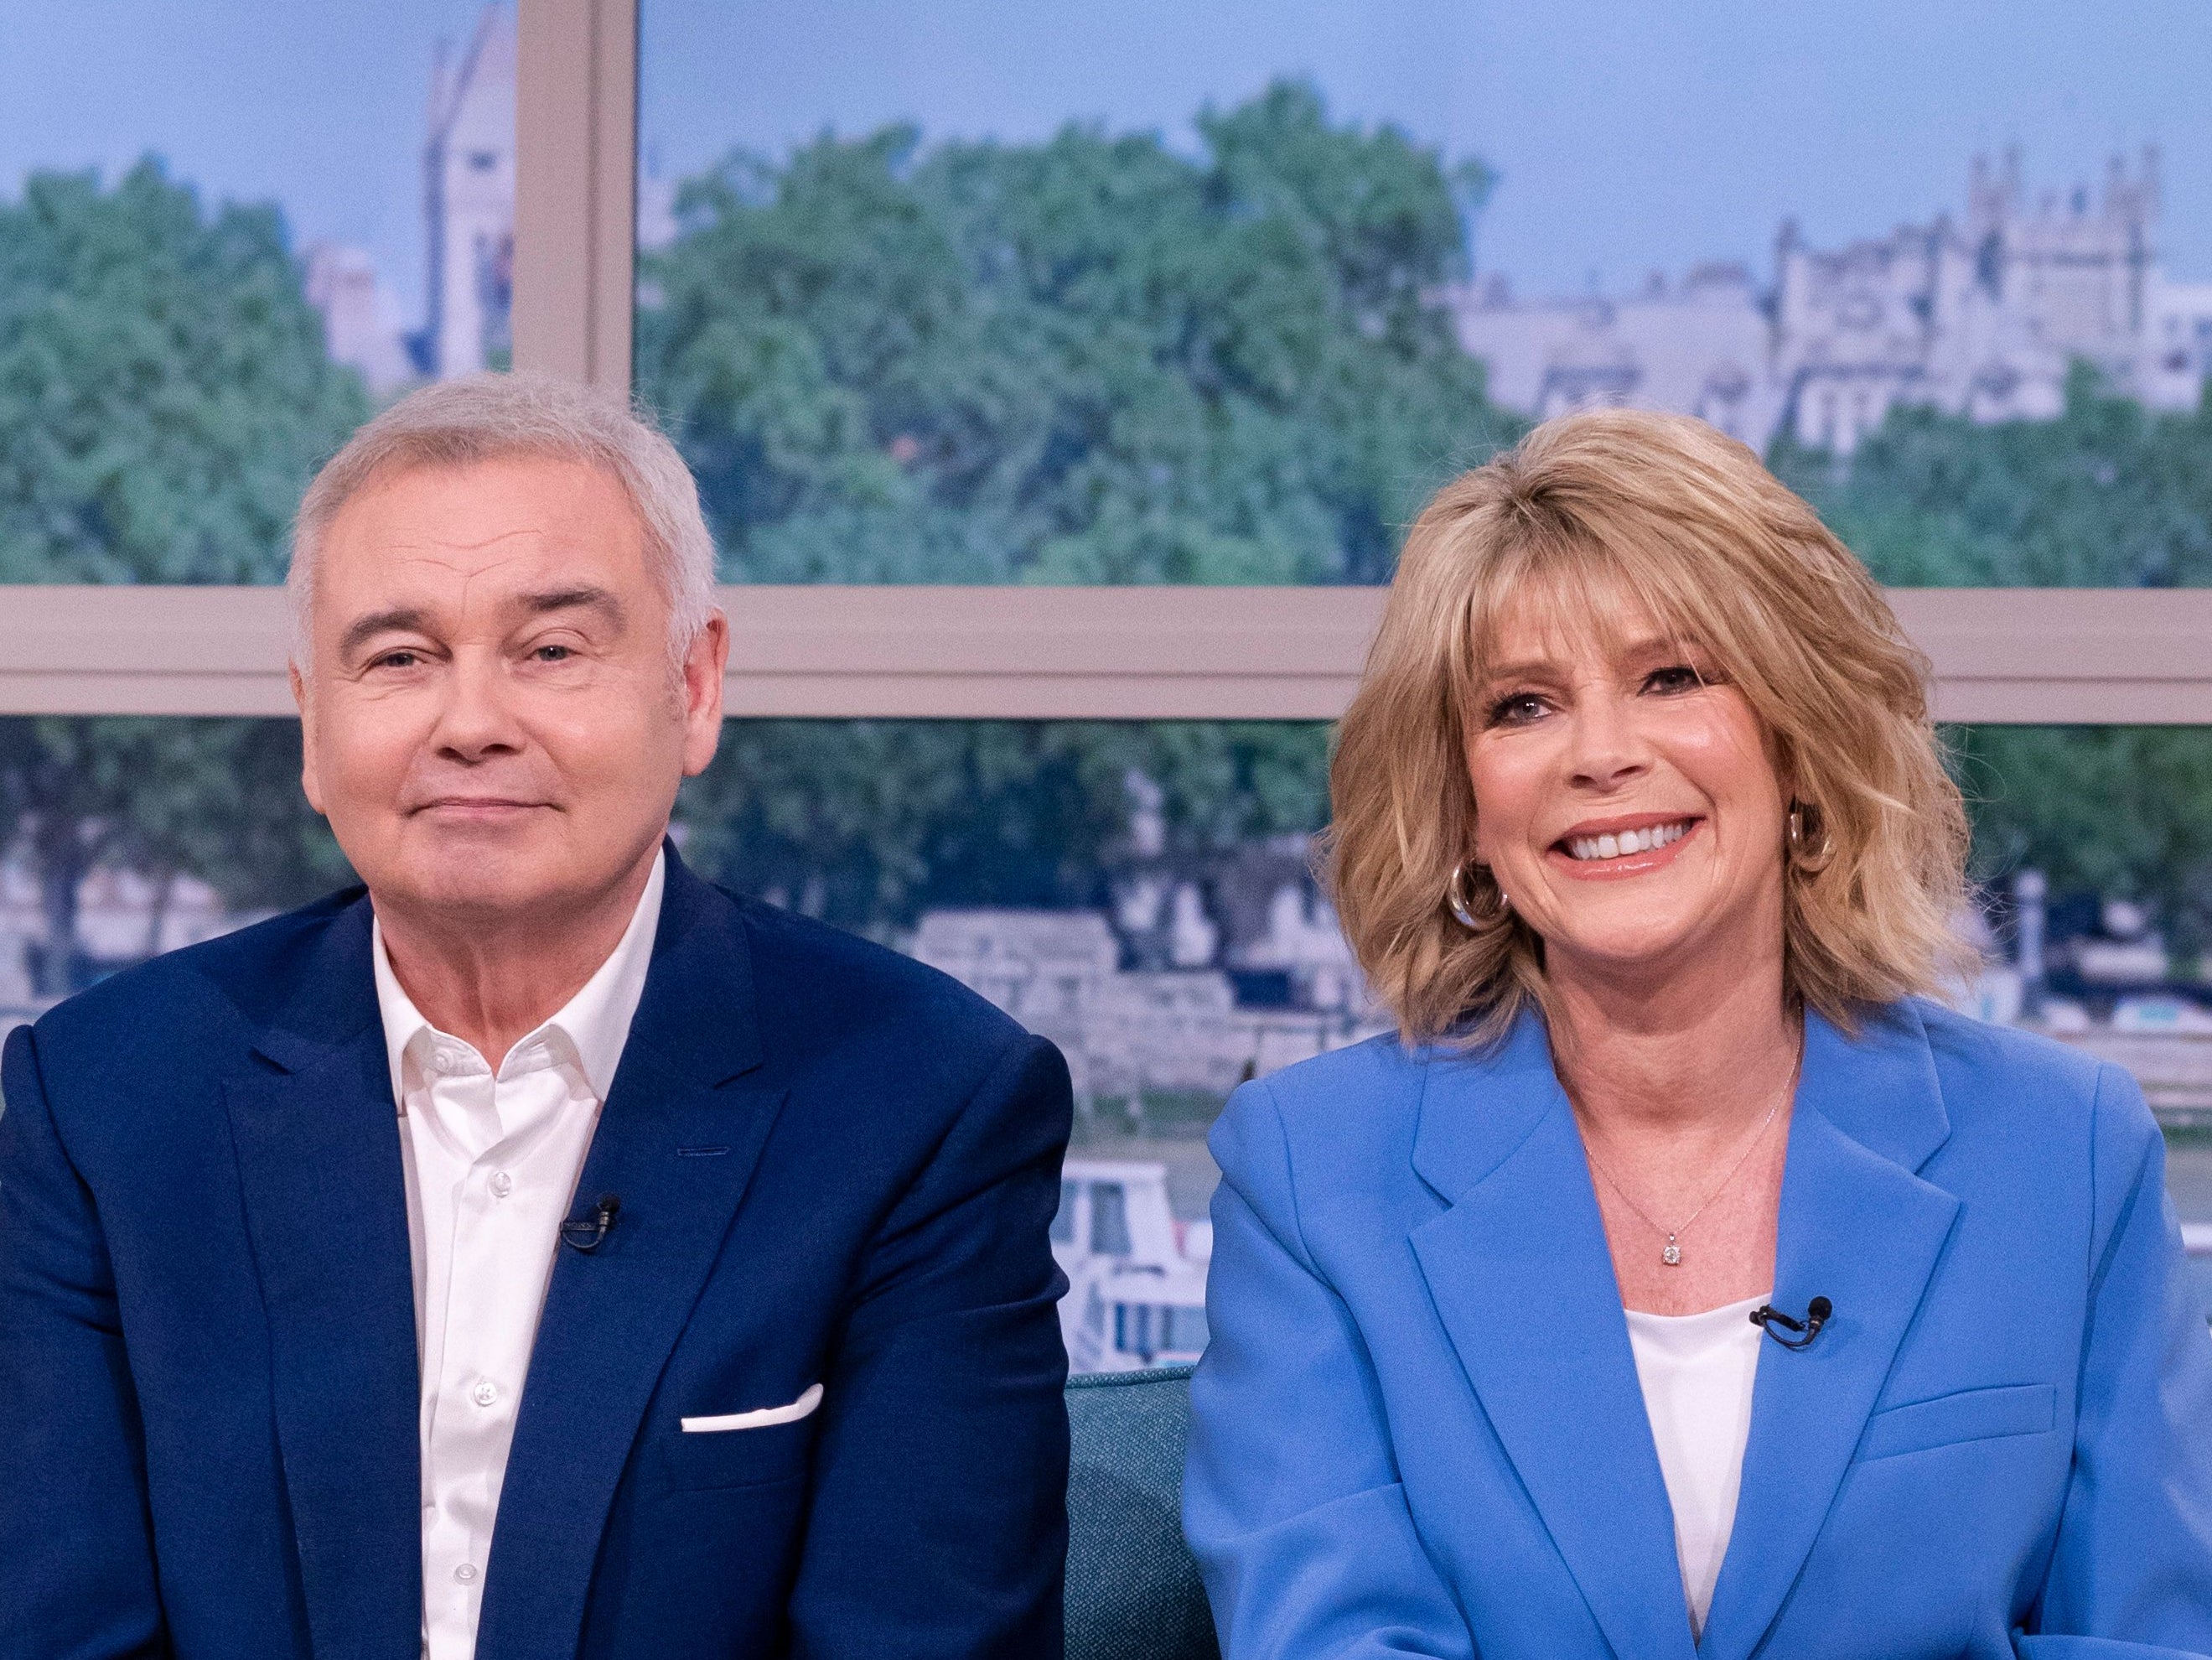 Eamonn Holmes and Ruth Langaford have presented 'This Morning' together since 2006